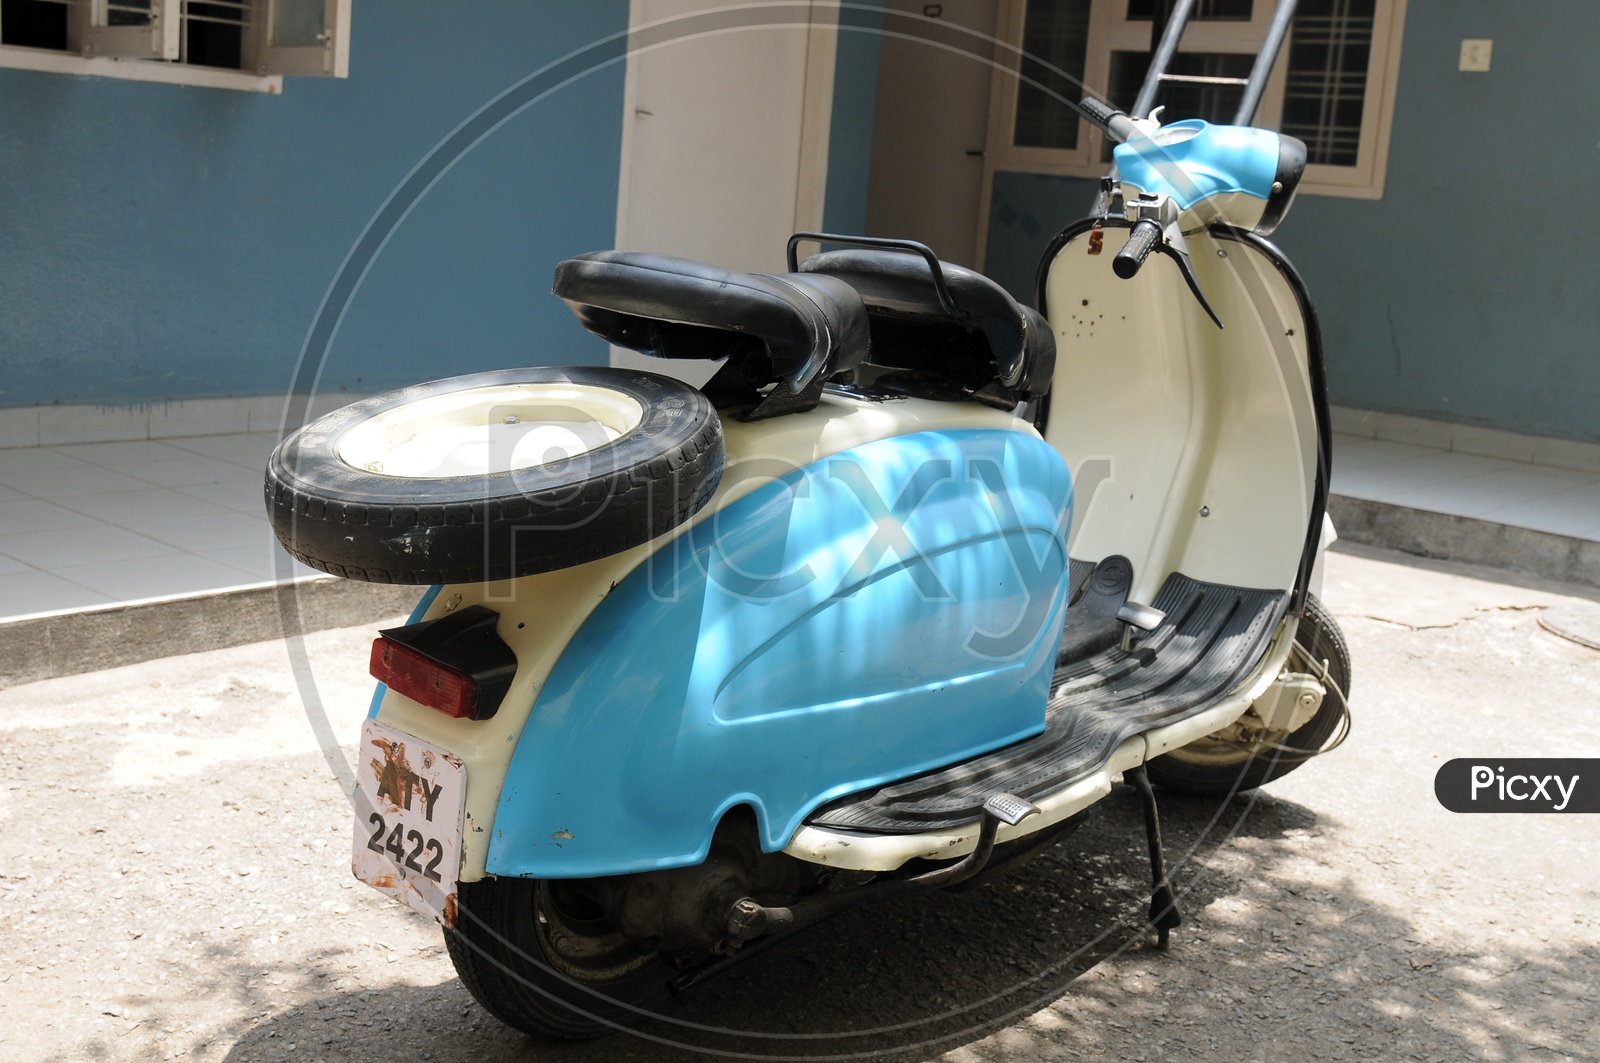 An Old Vintage Scooter